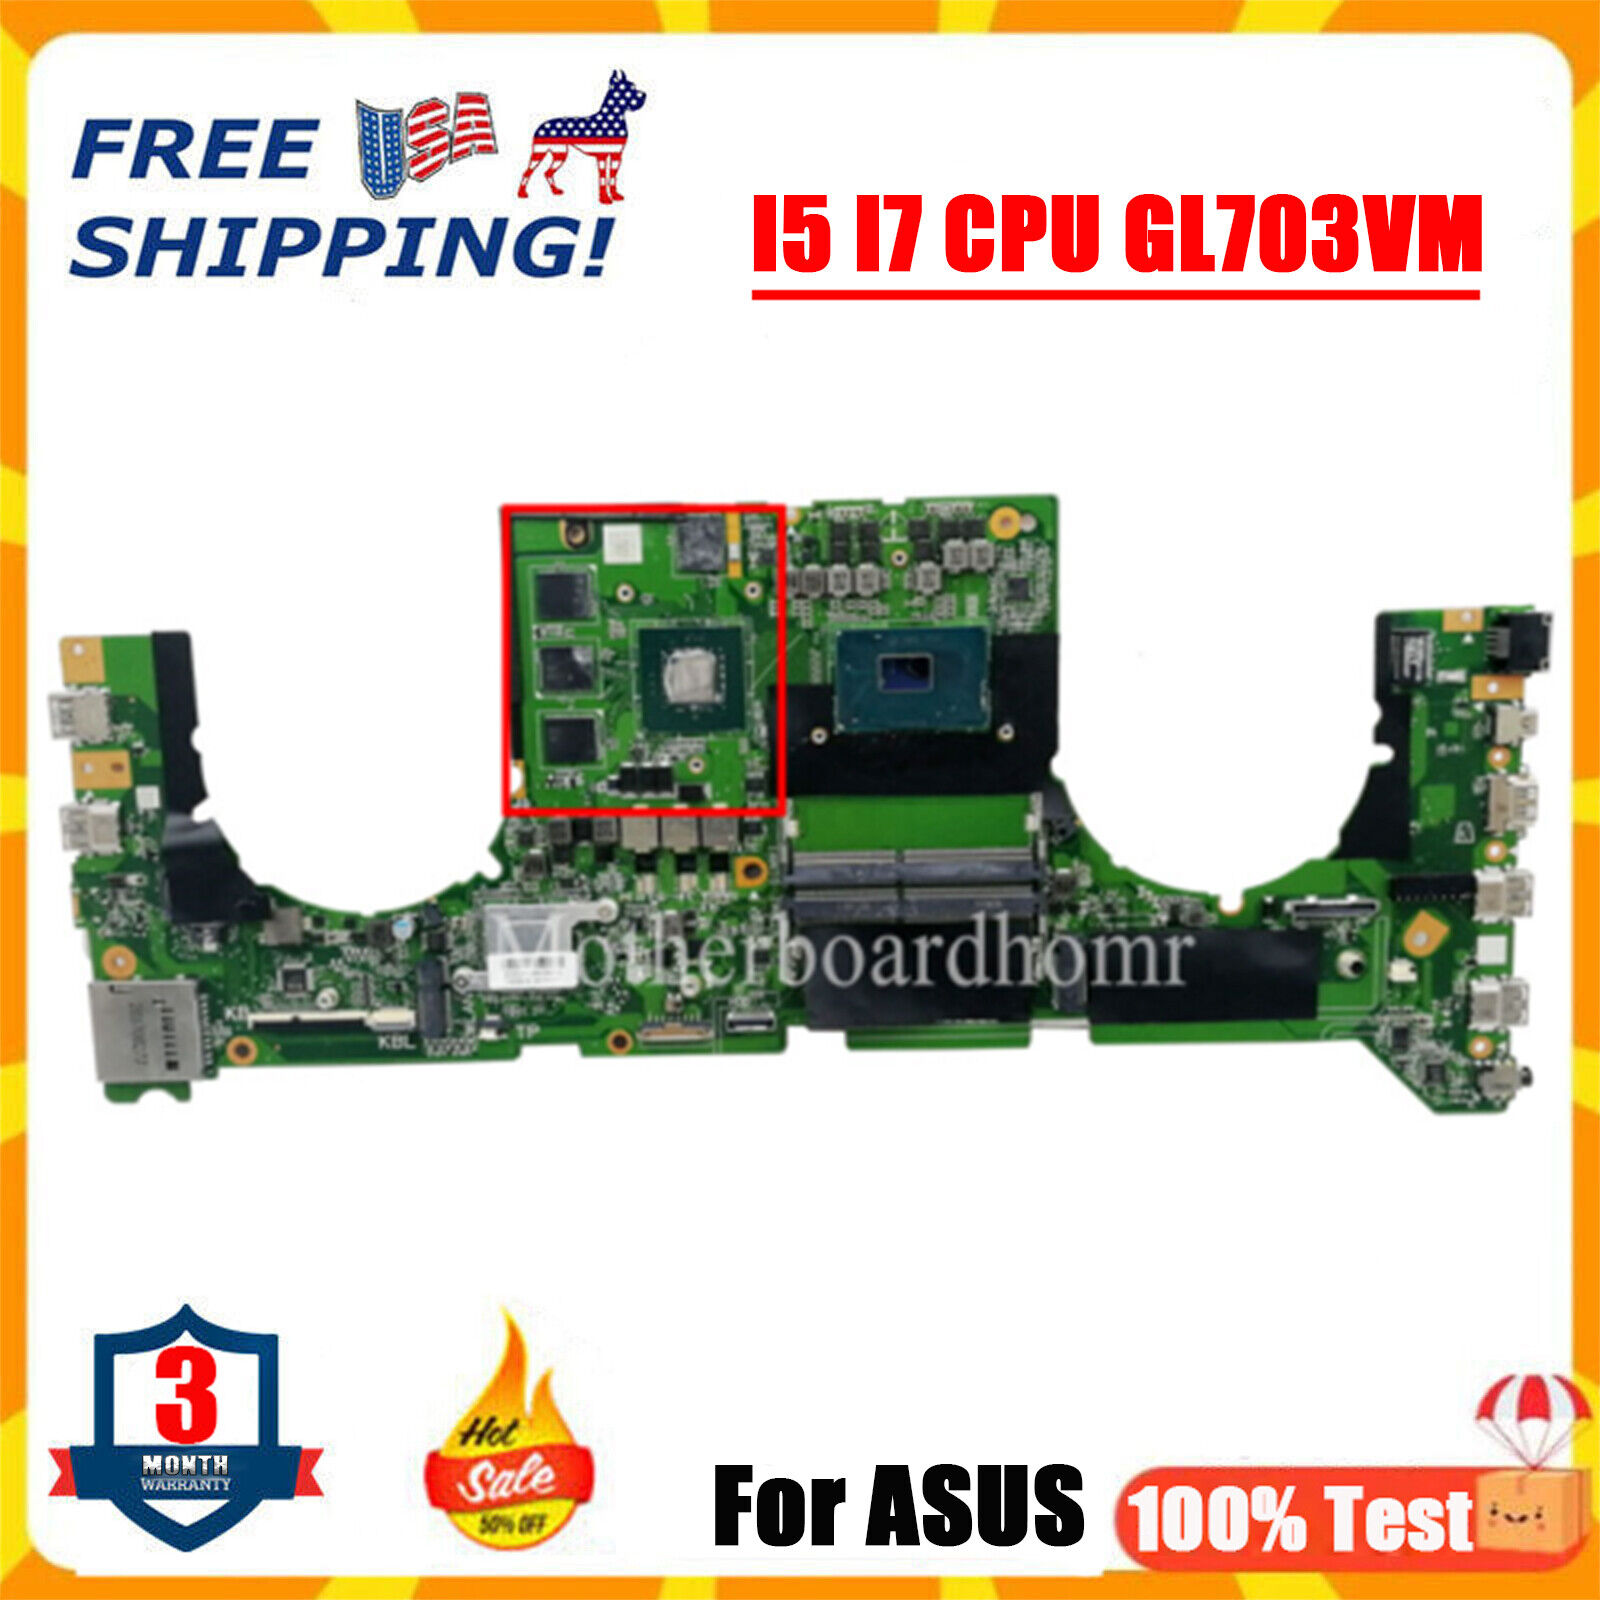 FOR ASUS GL703VD GL703VM DABKNMB28A0 motherboard i7-7700HQ CPU mainboard